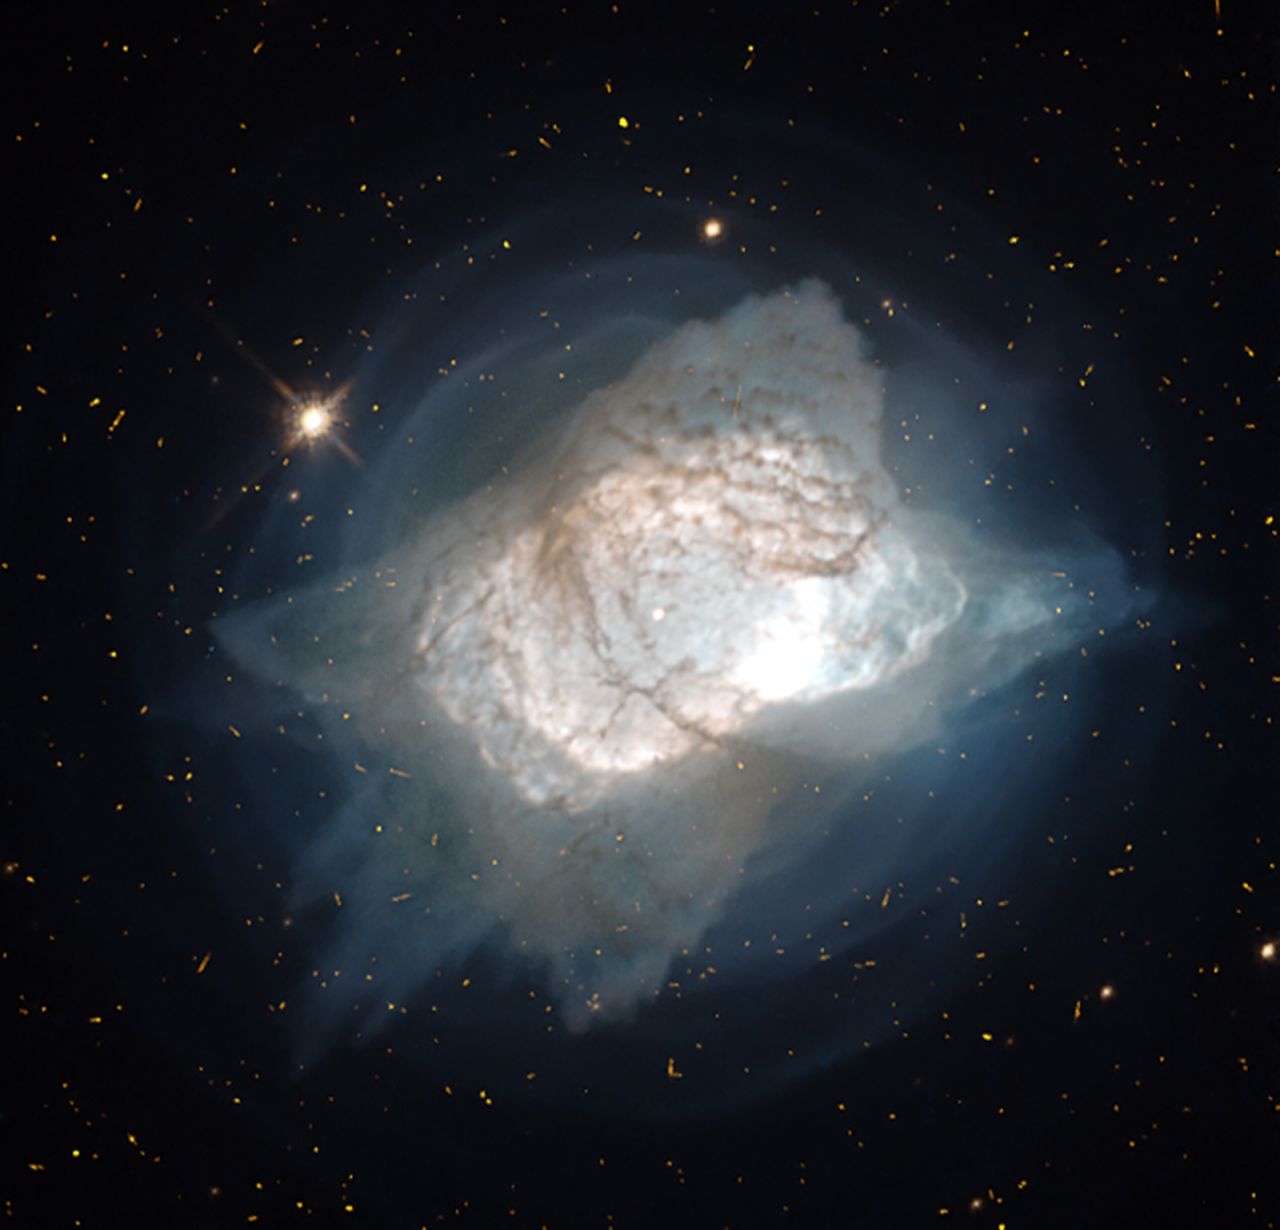 One of the brightest planetary nebulae on the sky and first discovered in 1878, nebula NGC 7027 can be seen toward the constellation of the Swan.